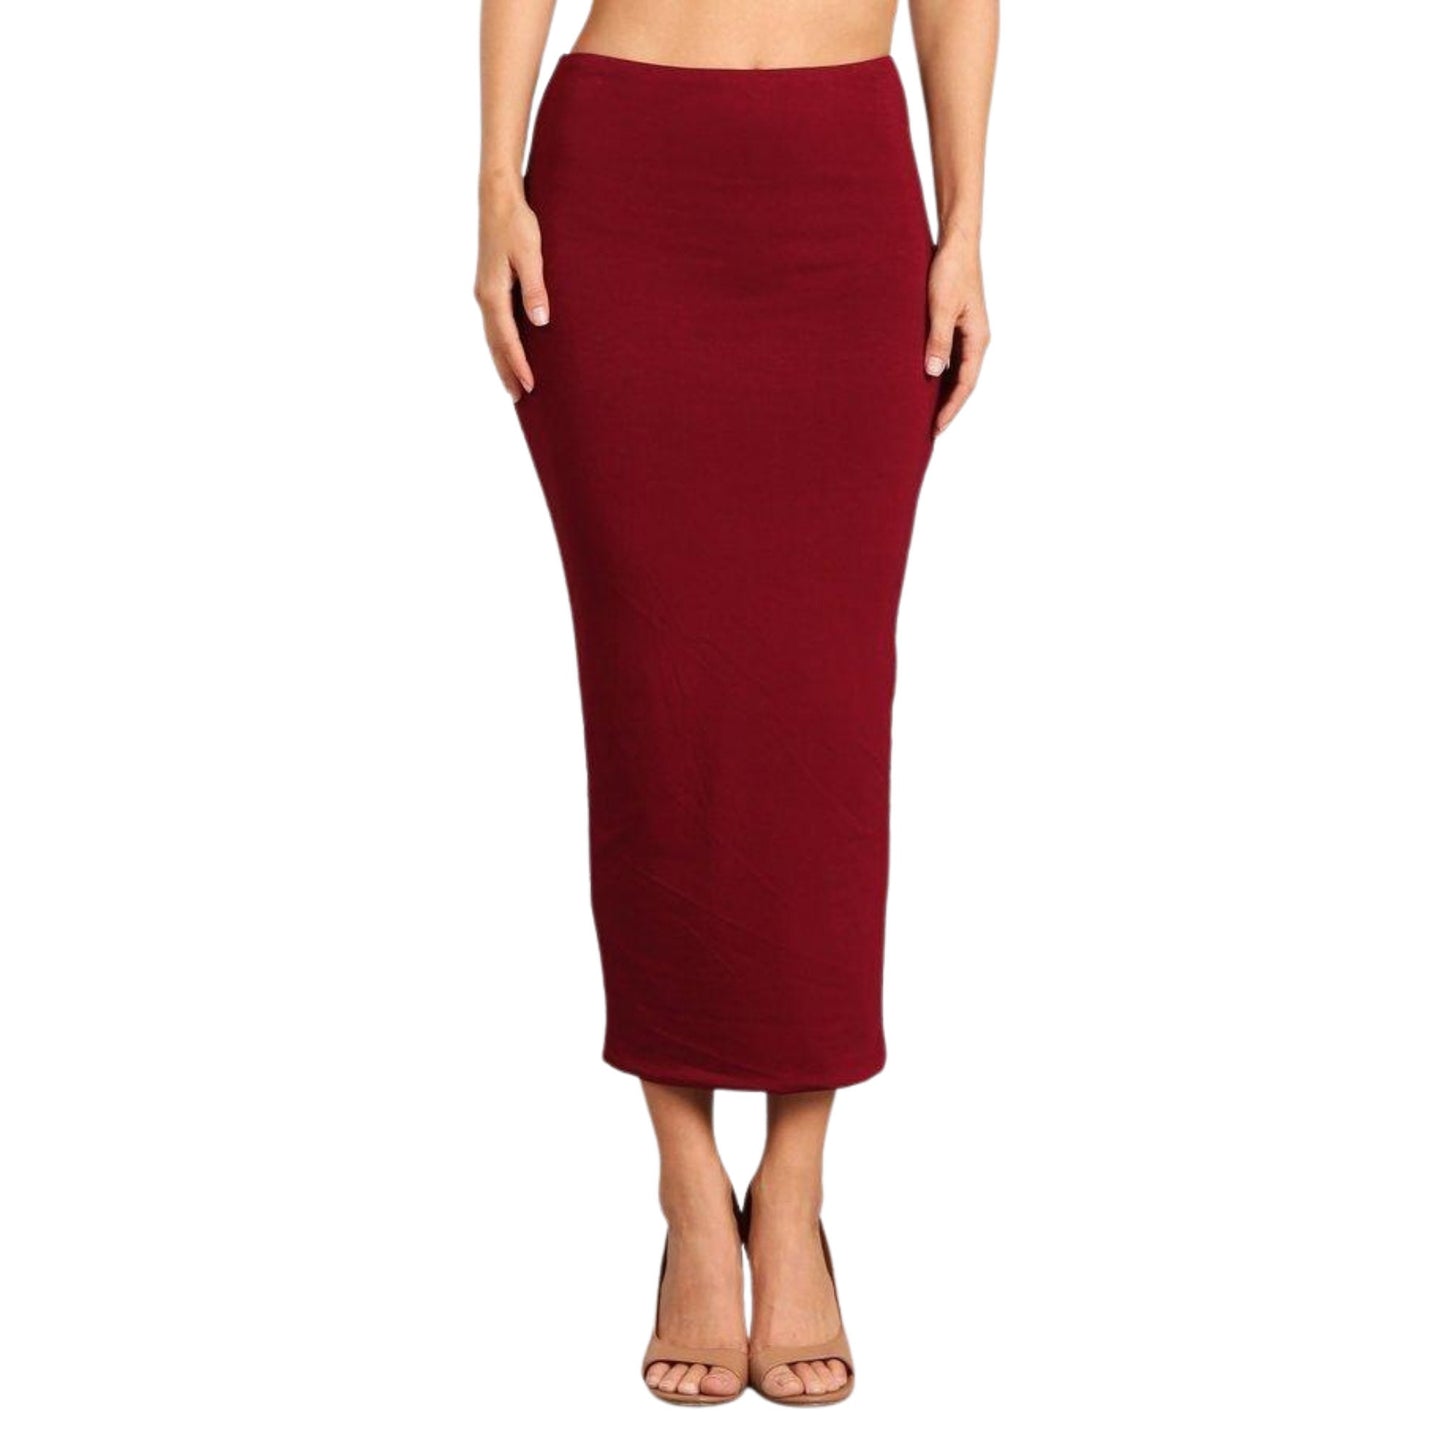 Double Layer No Slit Long Midi Pencil Skirt. Super Sexy Great Silhouette. Wine Color. Not See Thru. Lyrca for Stretch. Great for Modesty